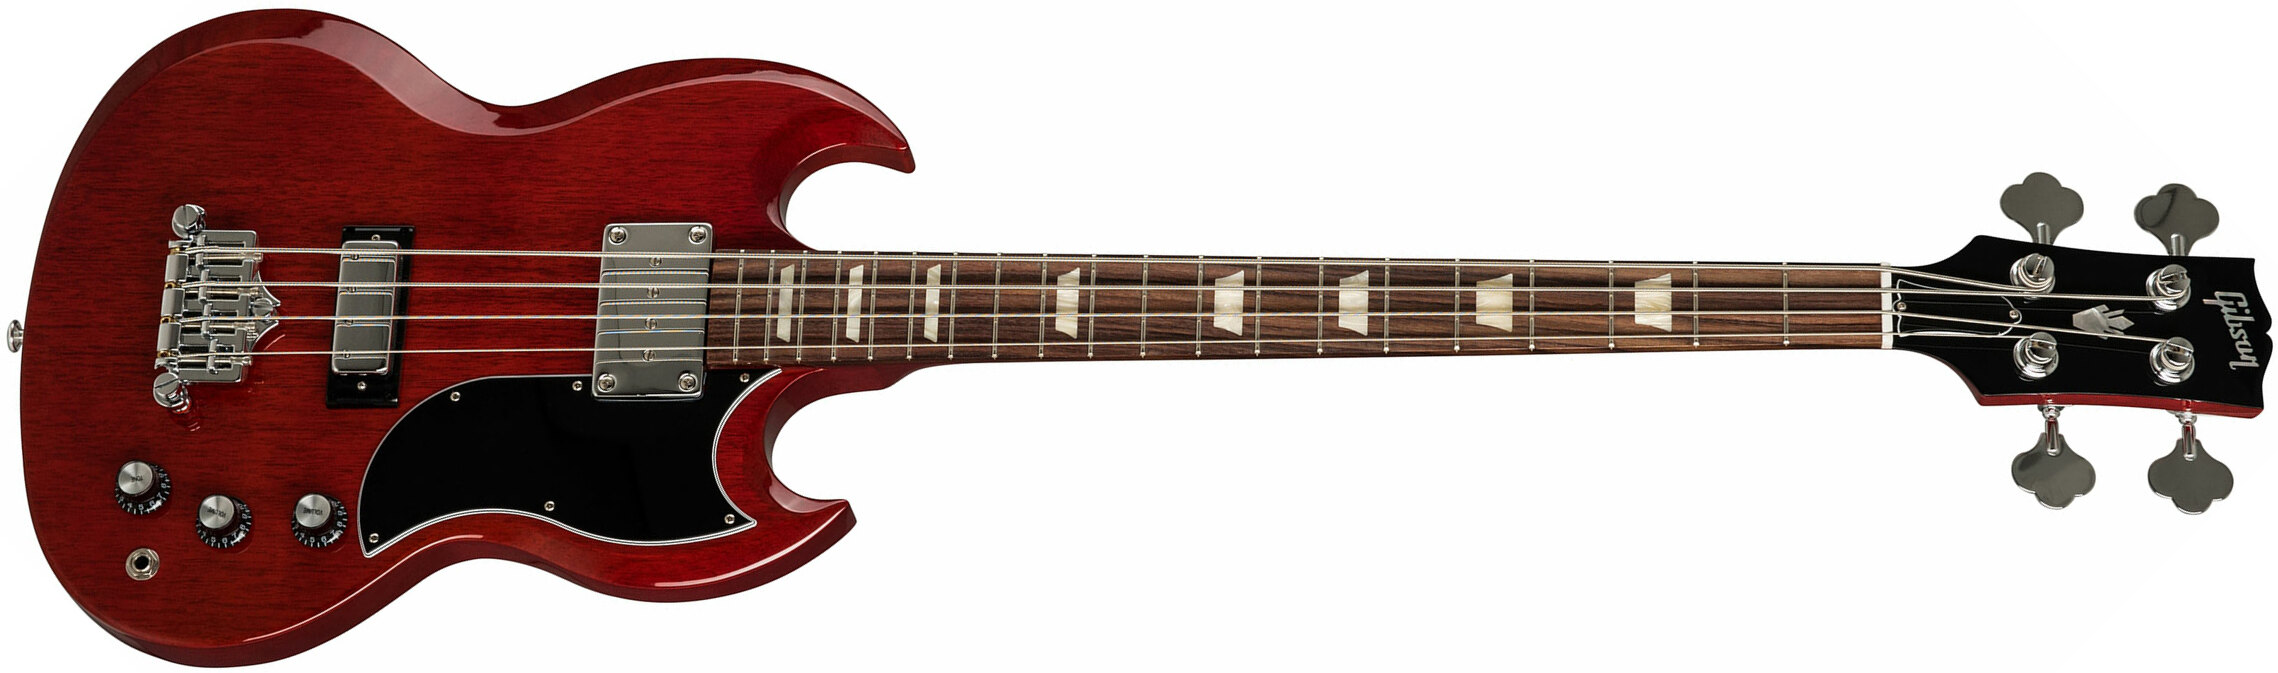 Gibson Sg Standard Bass - Heritage Cherry - Solid body electric bass - Main picture